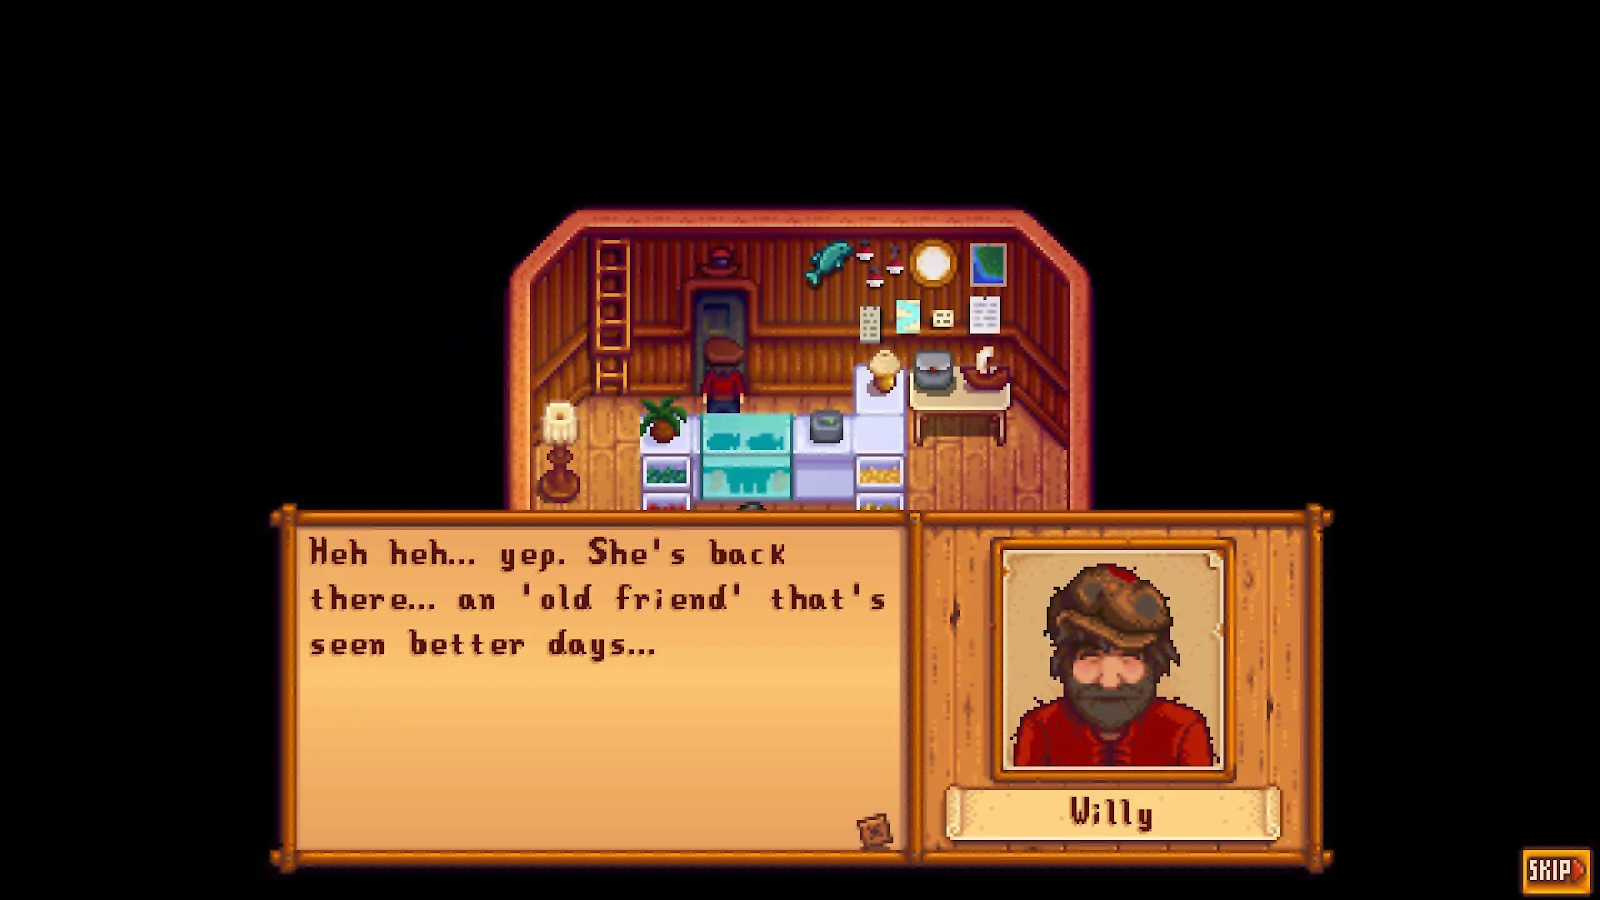 Willy's boat